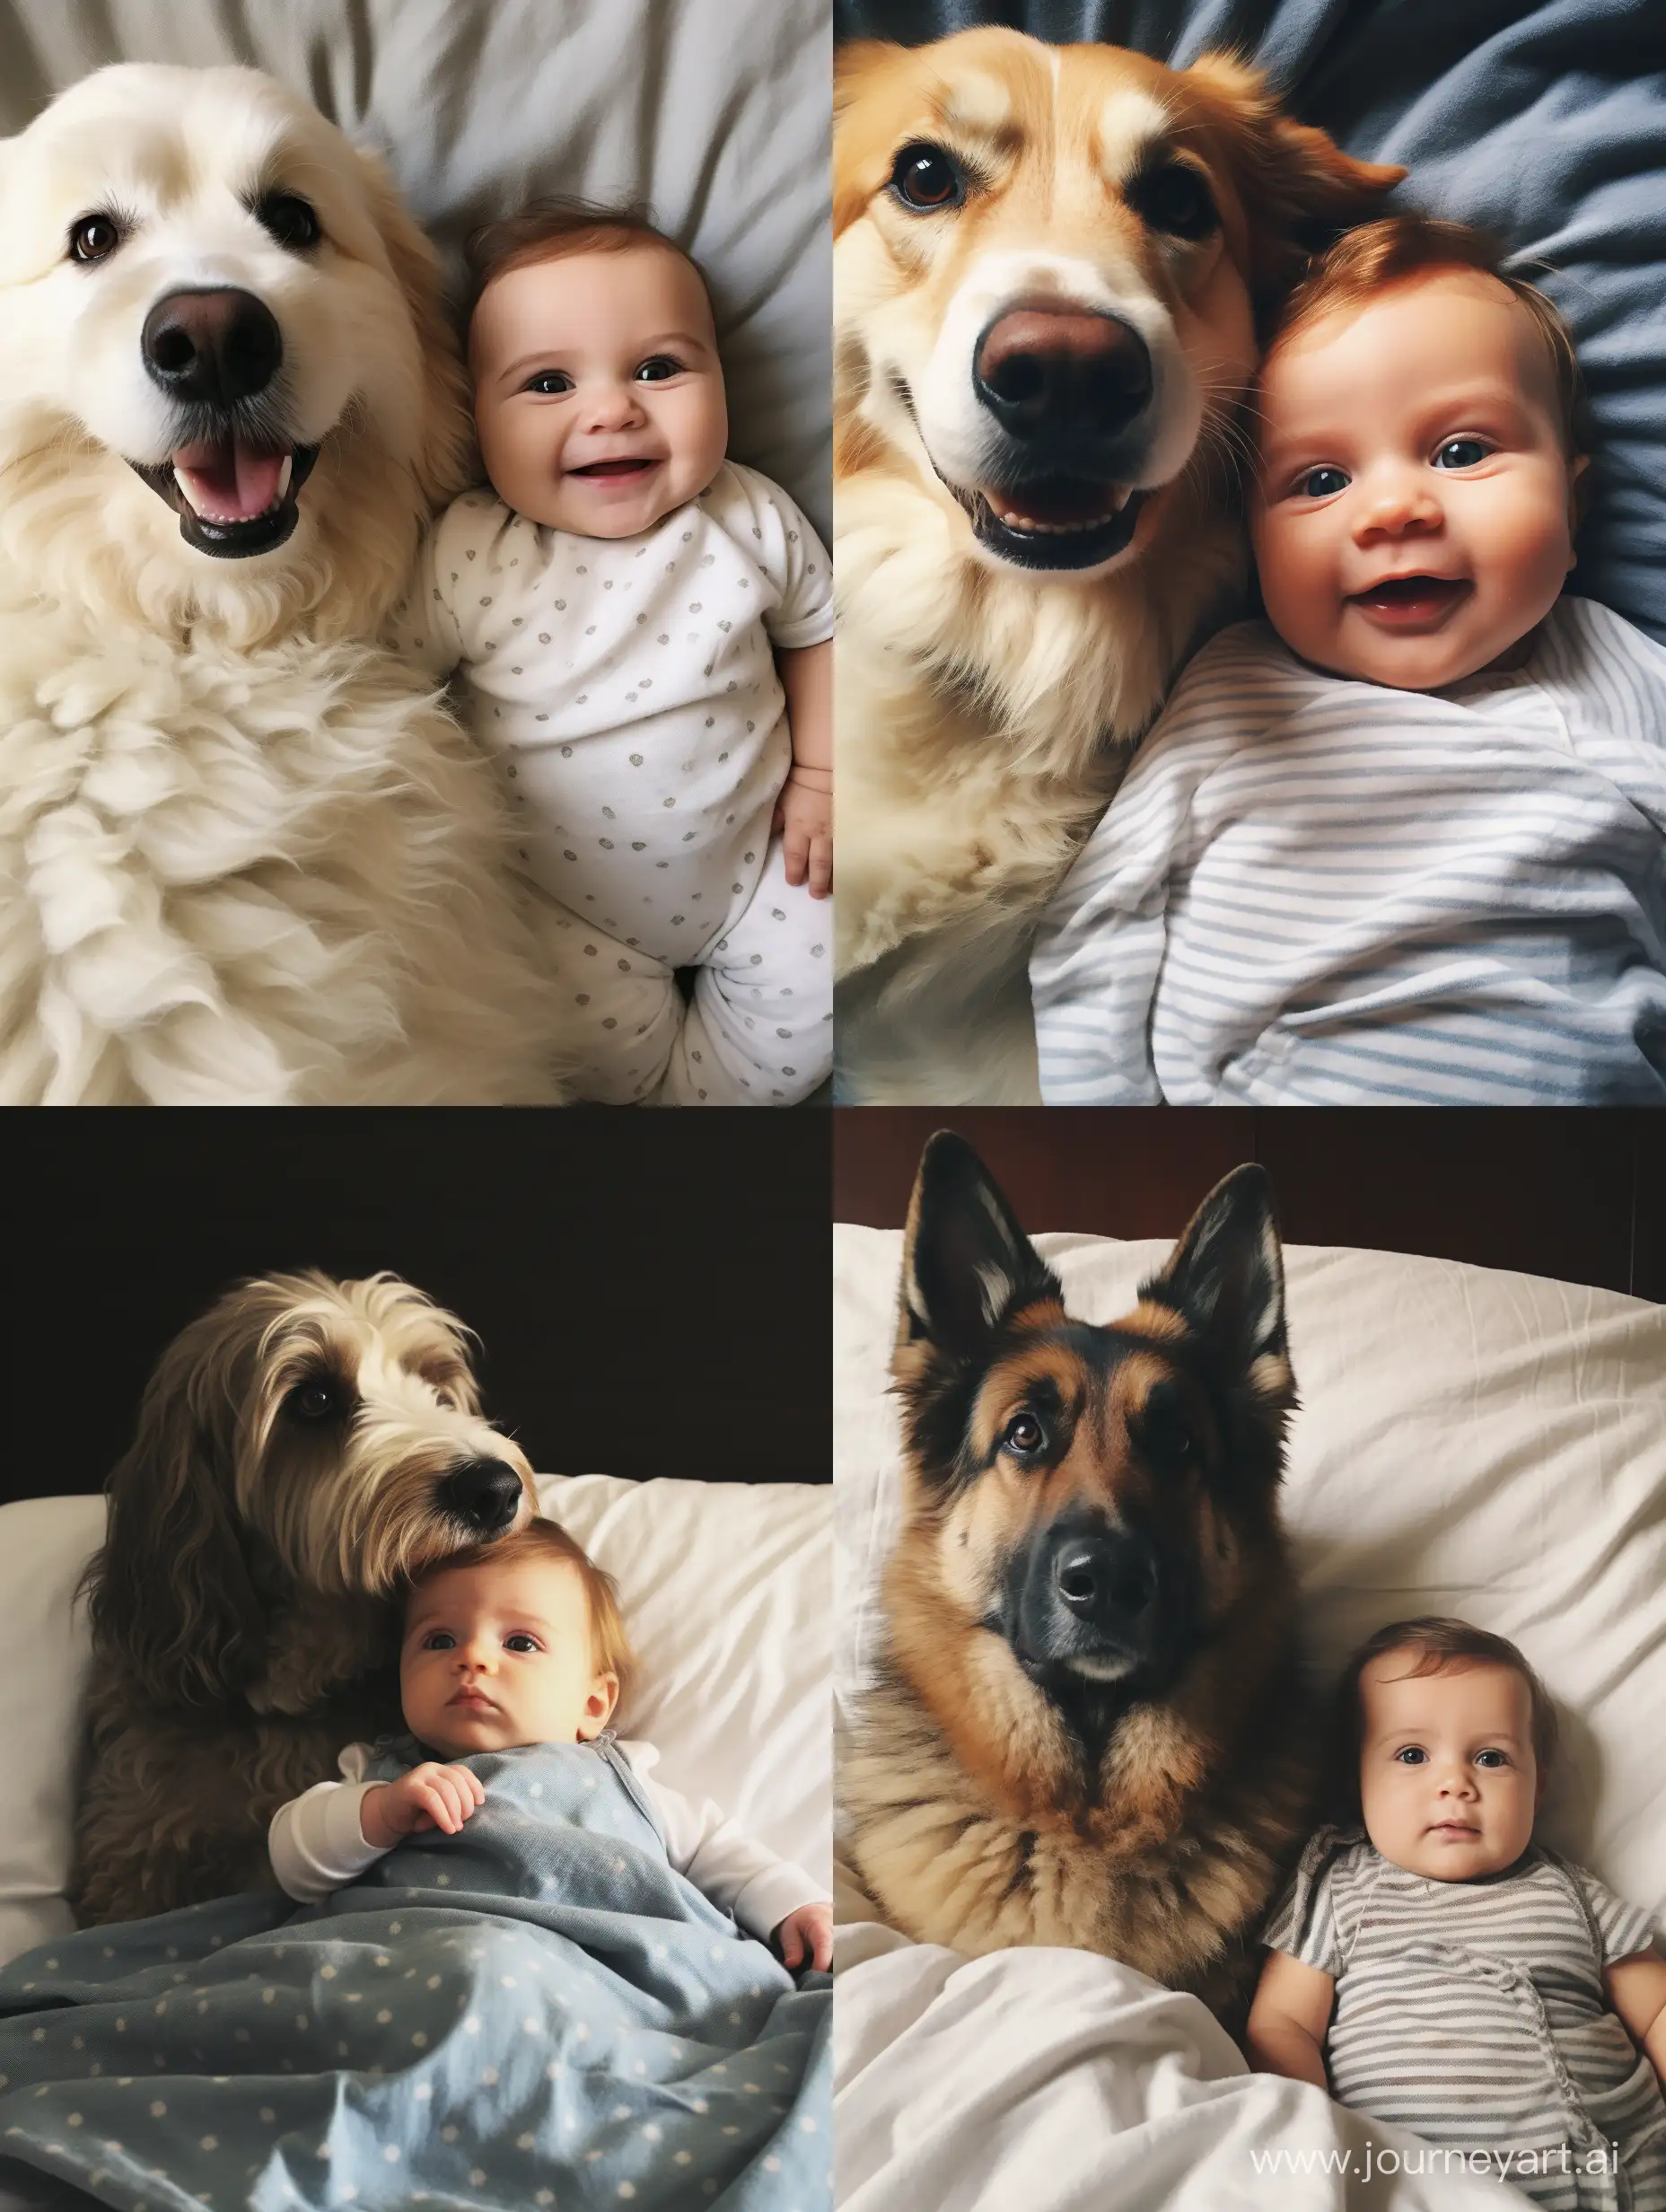 A dog caring for a baby